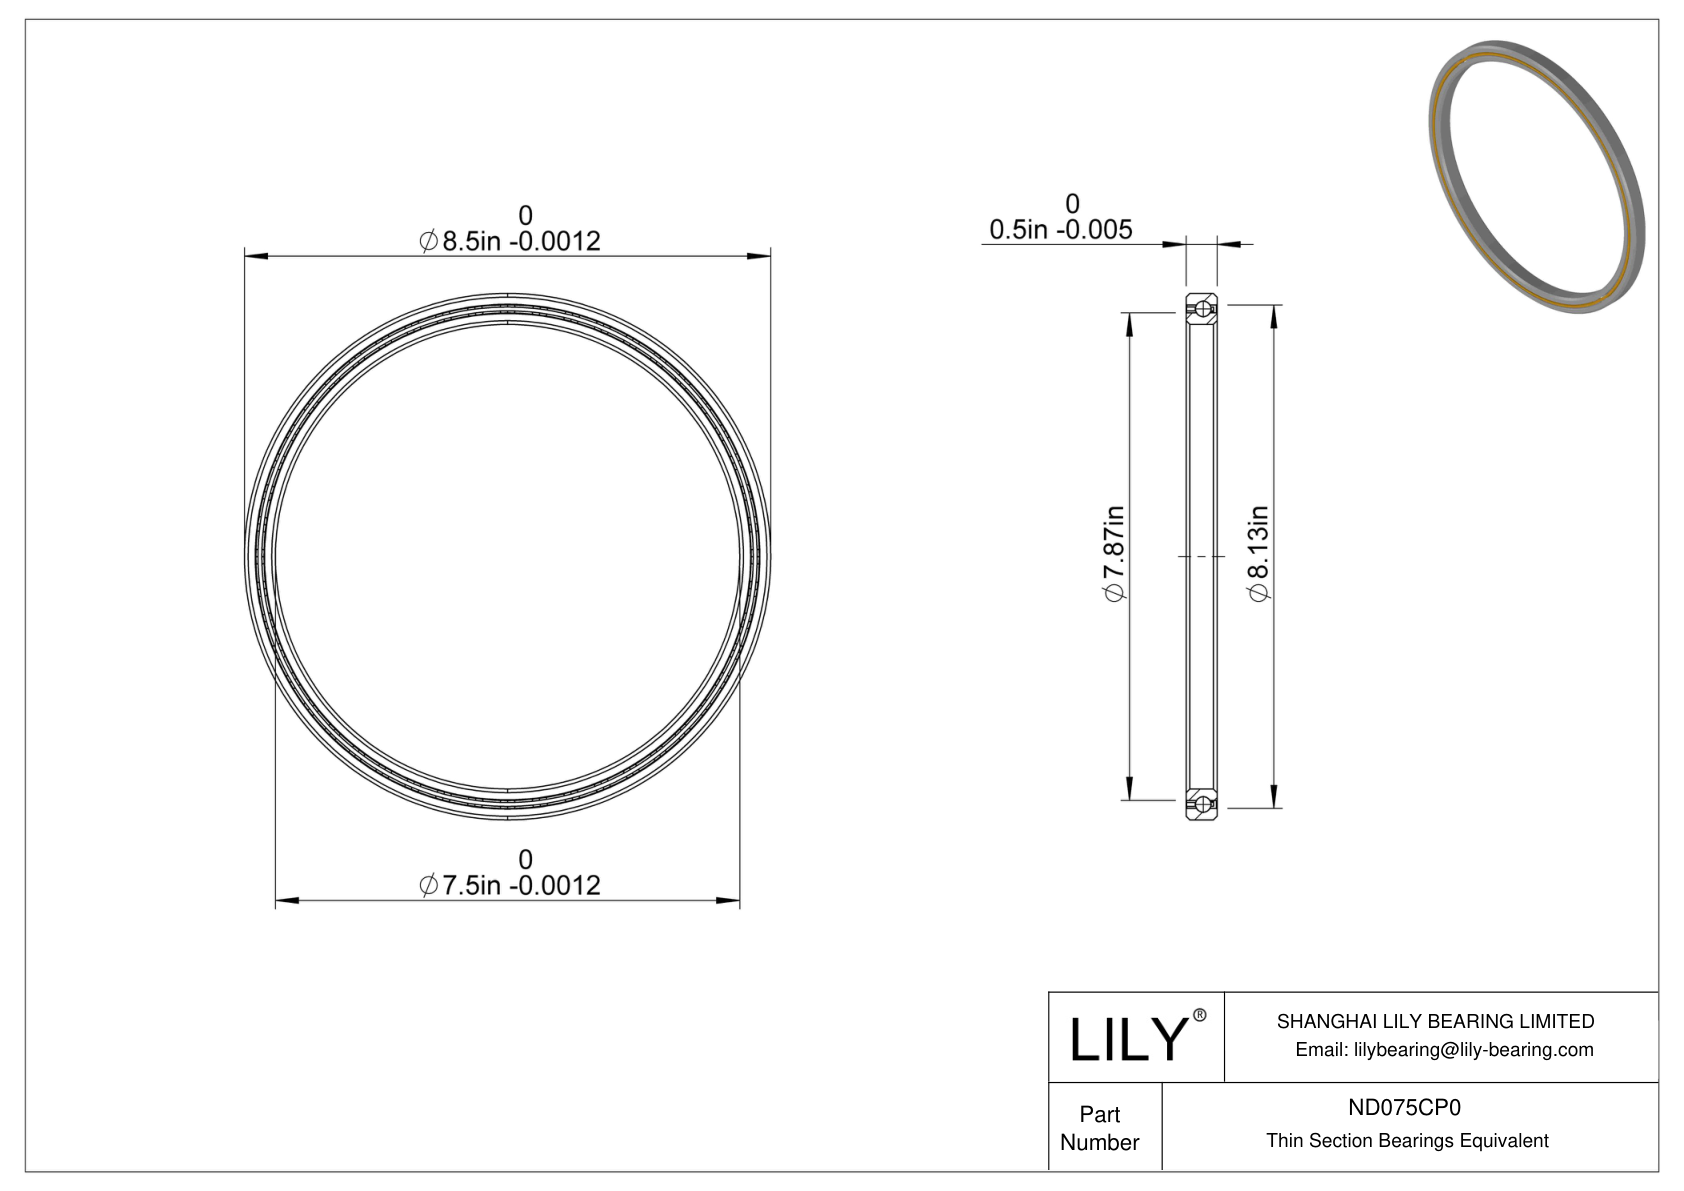 ND075CP0 Constant Section (CS) Bearings cad drawing